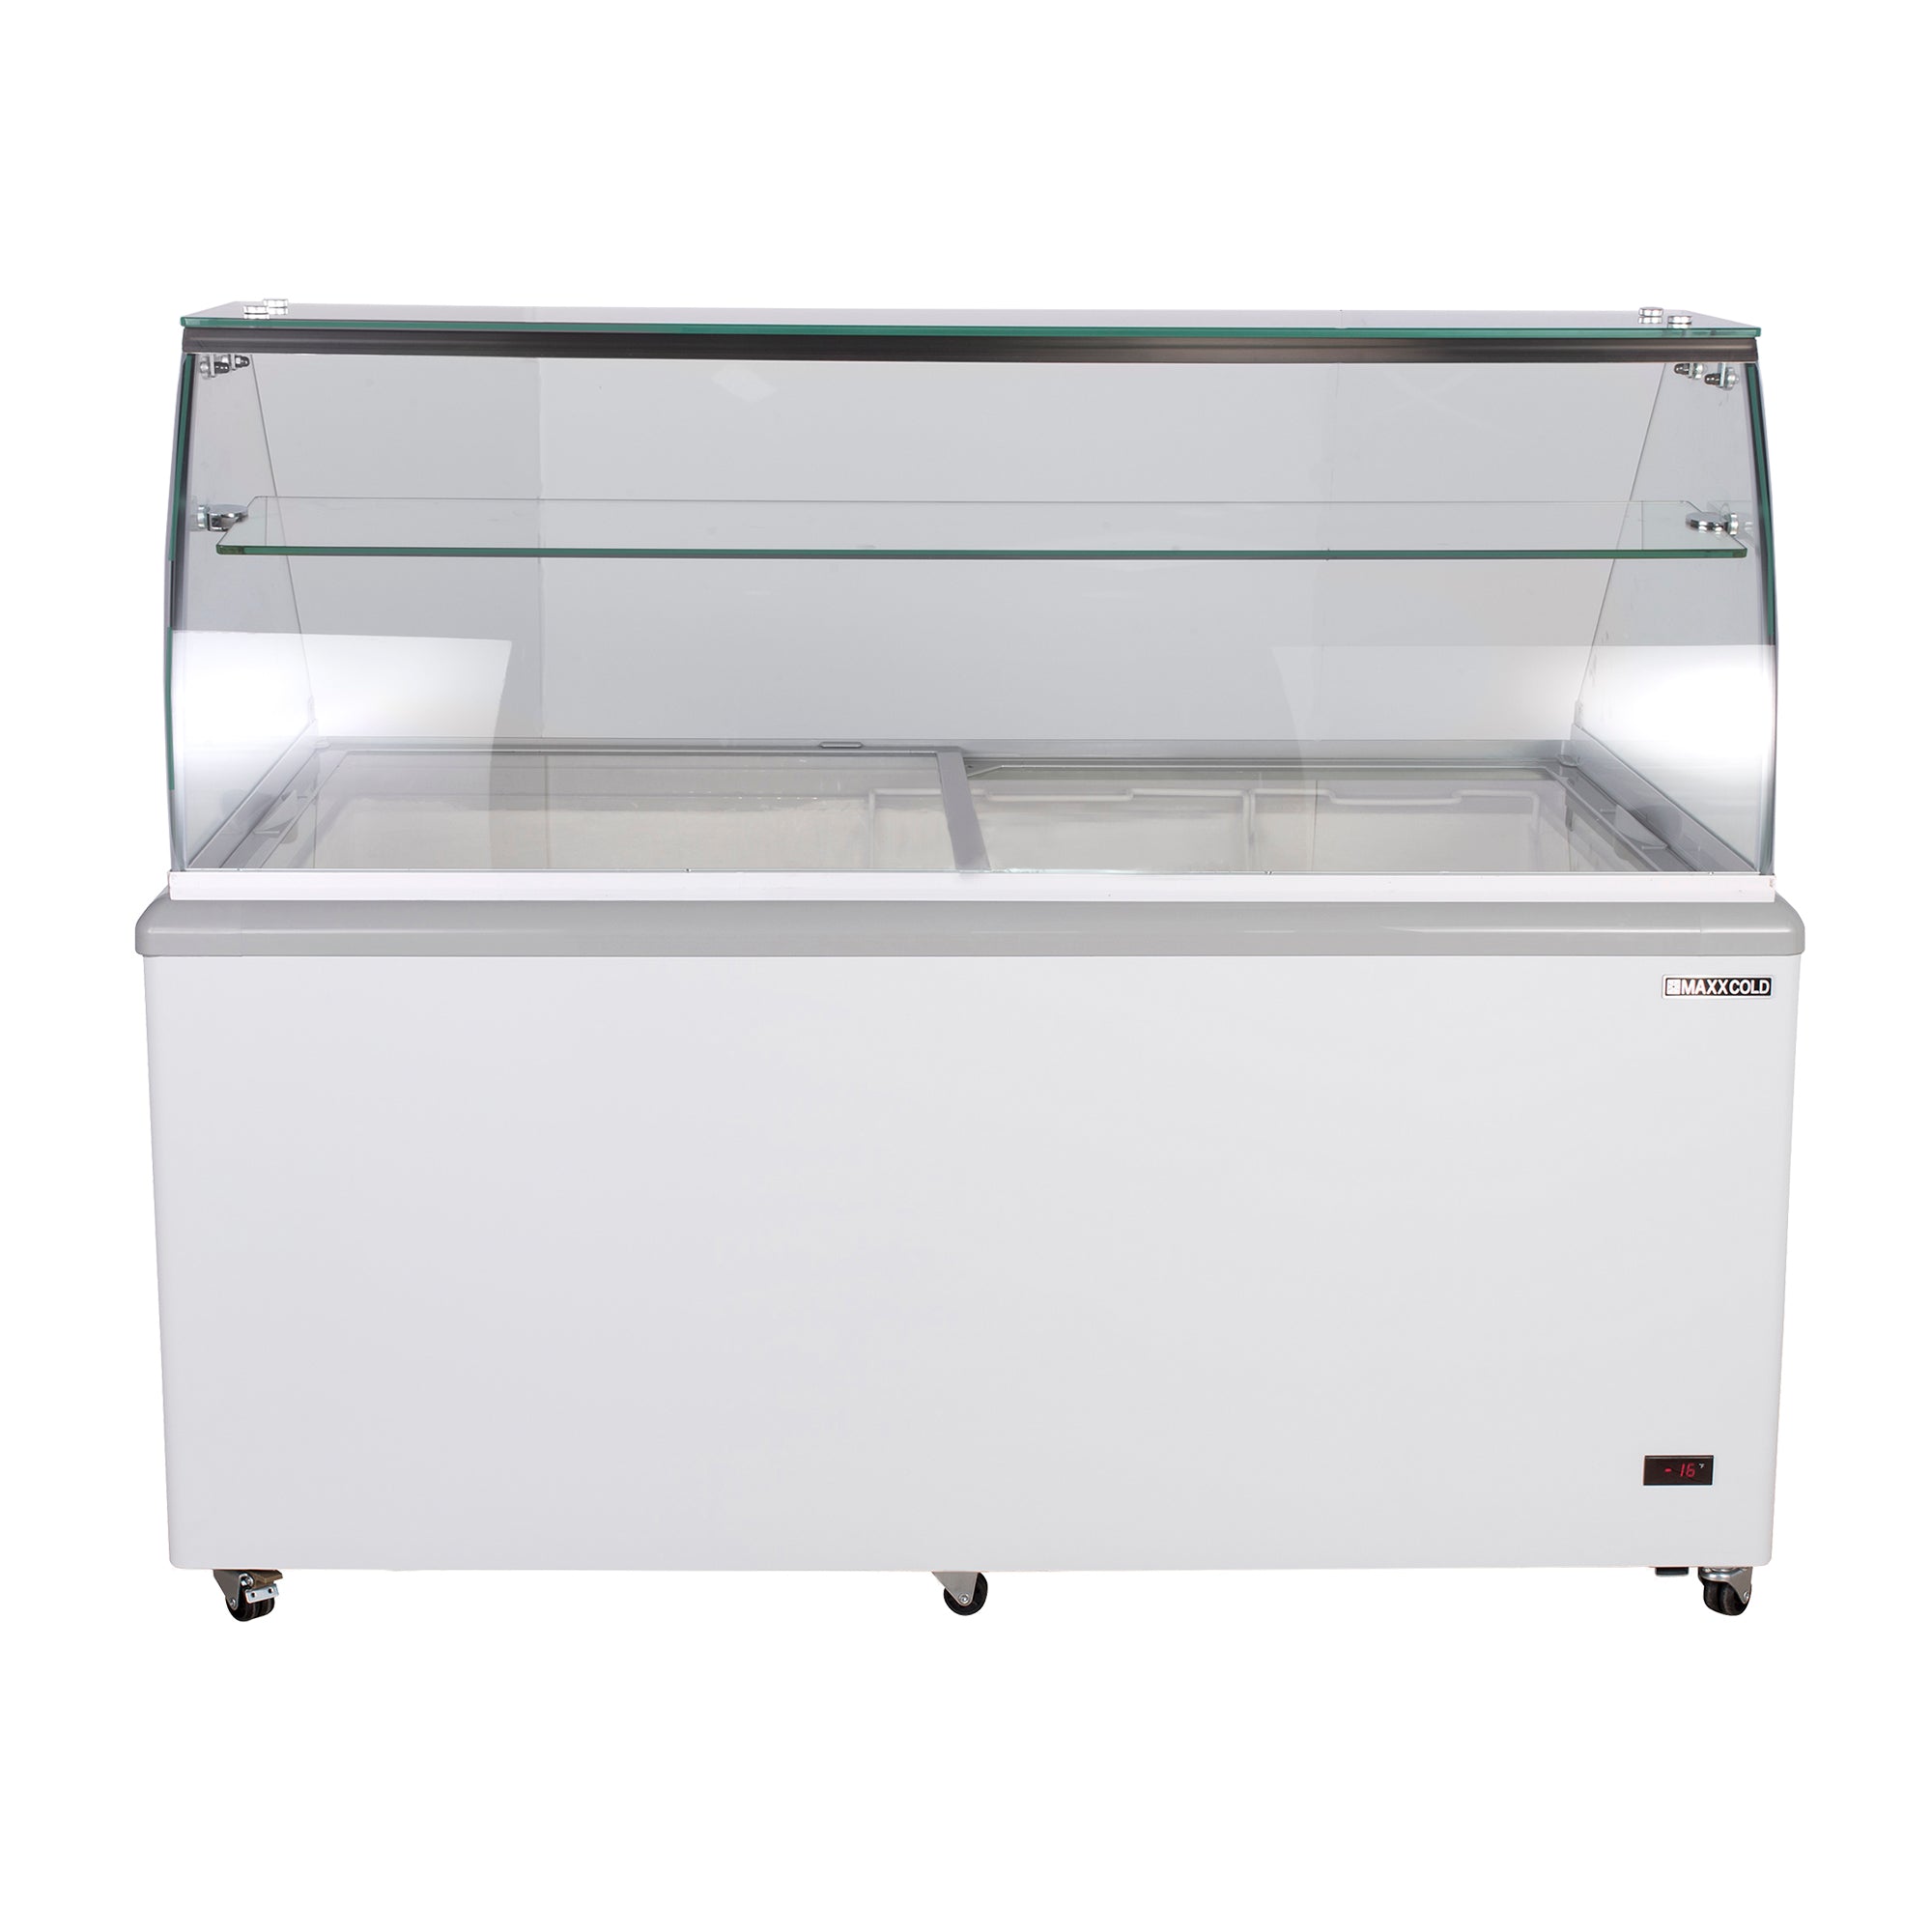 Maxx Cold - MXDC-12, Maxx Cold Curved Glass Ice Cream Dipping Cabinet Freezer, 70"W, 20 cu. ft. Storage Capacity, Holds up to (22) Flavor Tubs, in White